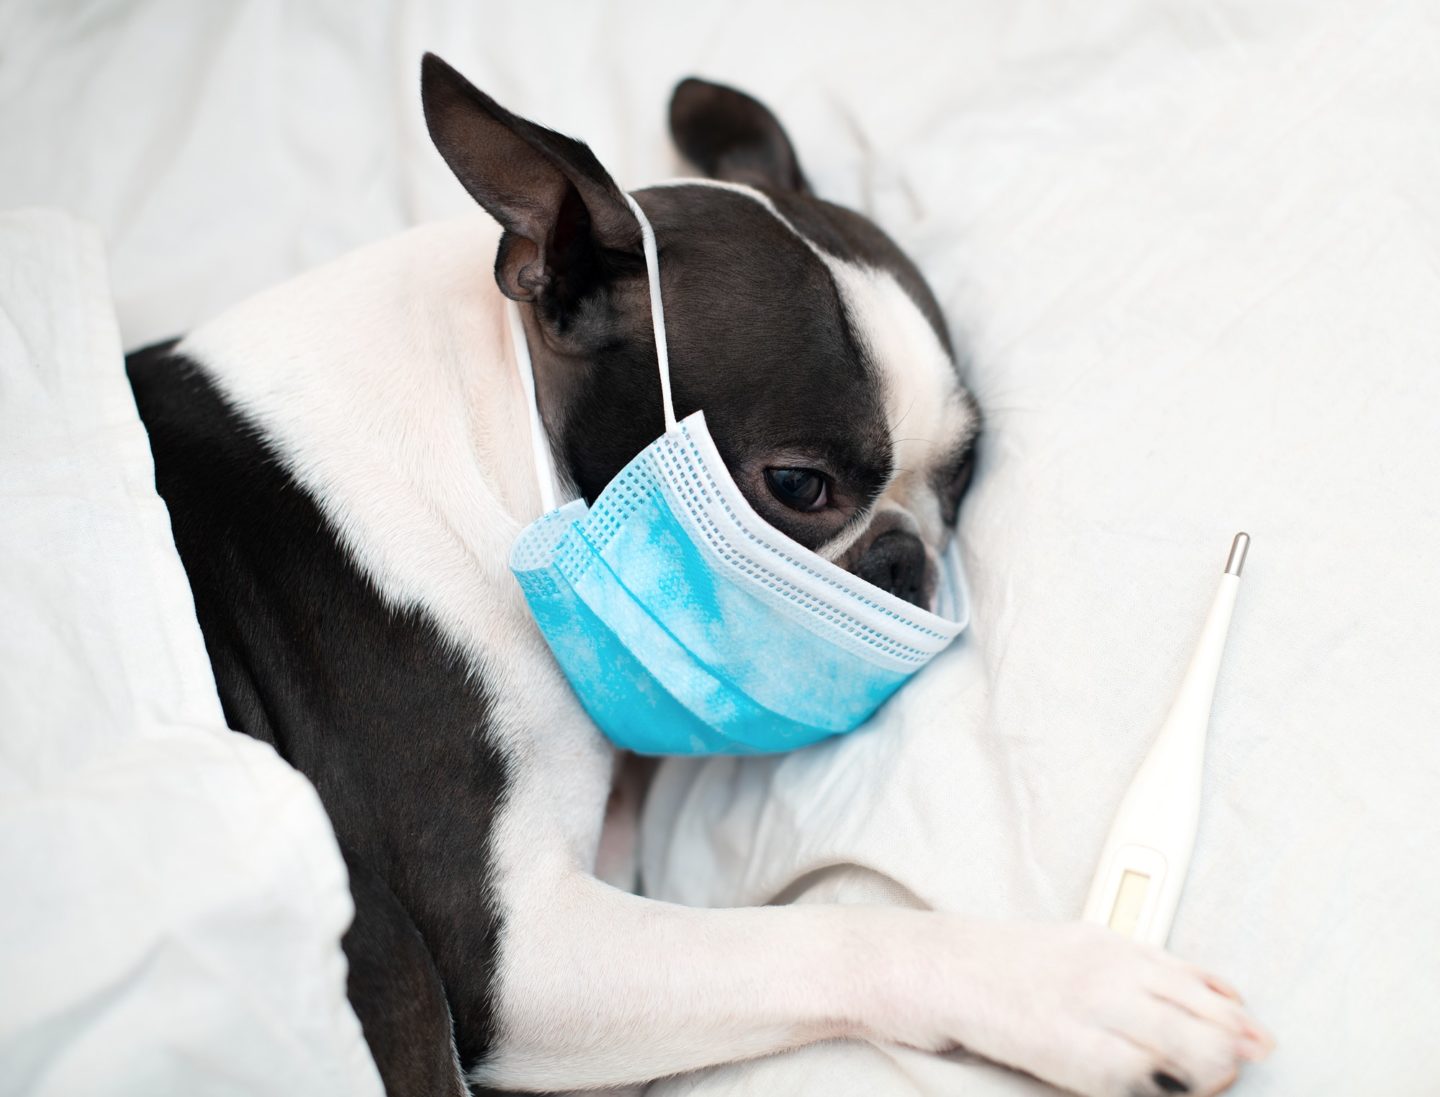 The Boston Terrier dog is ill and sleeps in a bed with a high temperature, wearing a medical mask.